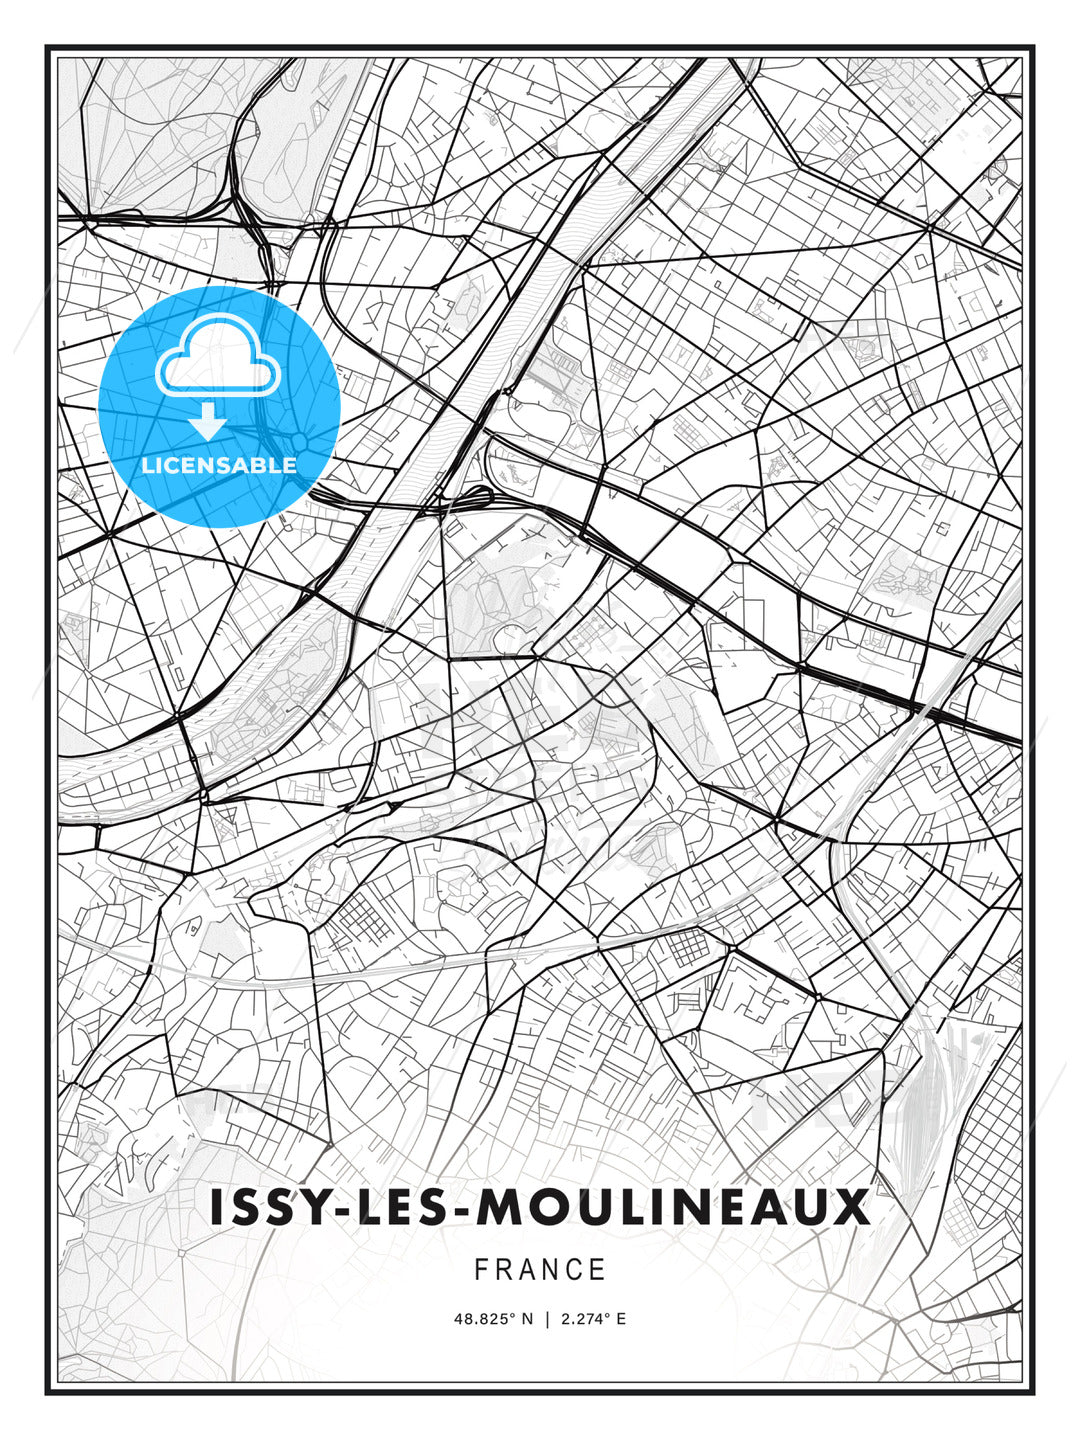 Issy-les-Moulineaux, France, Modern Print Template in Various Formats - HEBSTREITS Sketches